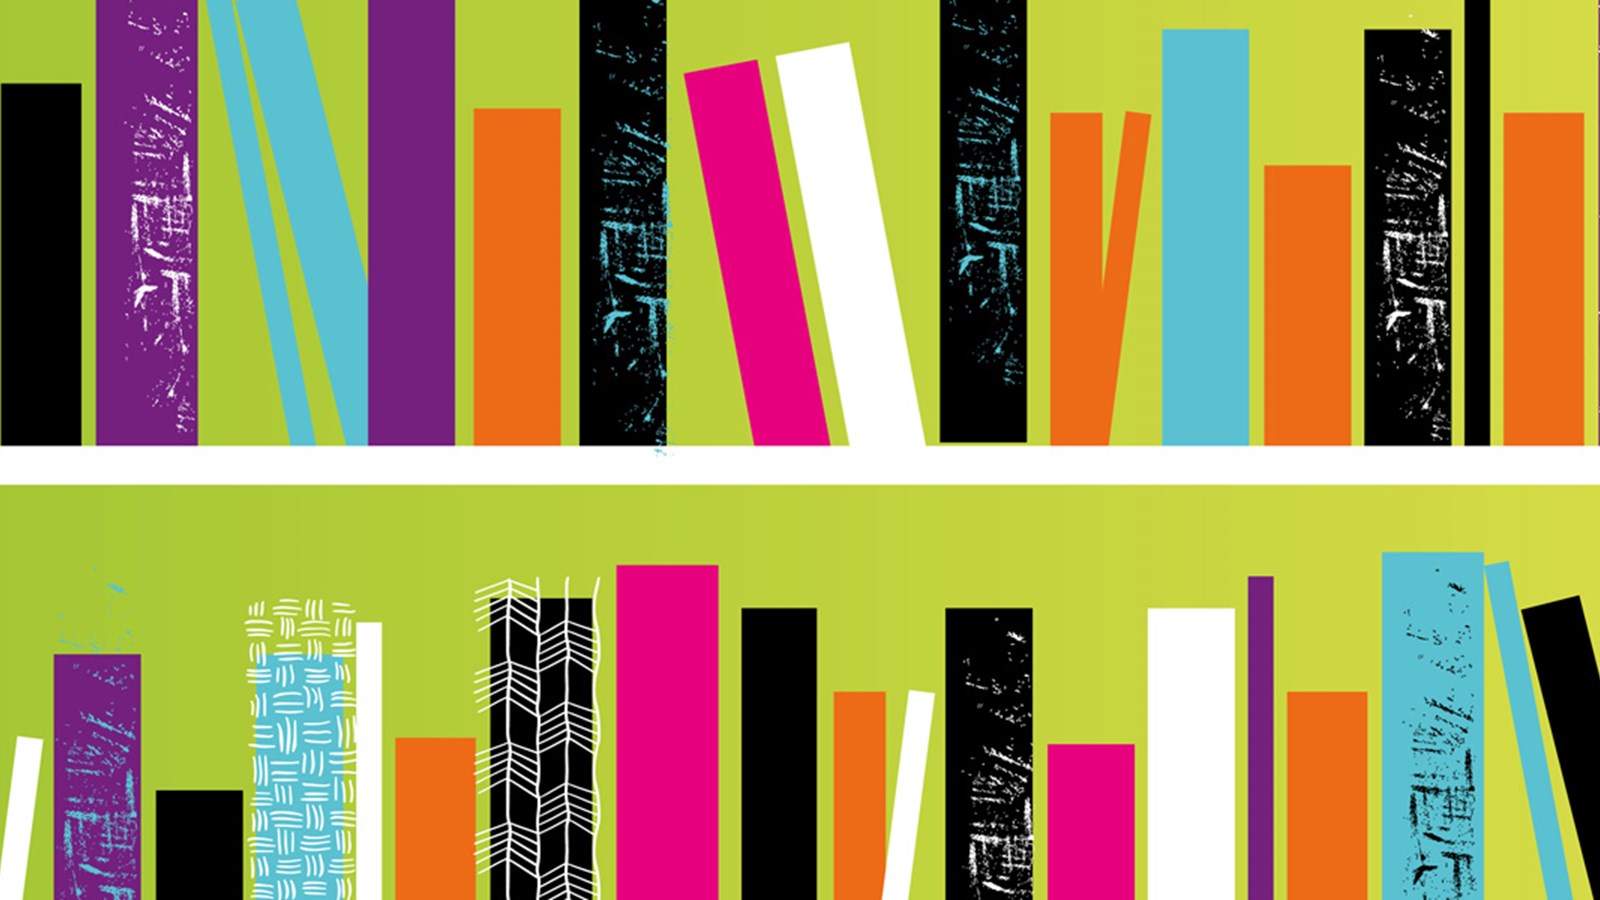 Illustration of a colourful bookshelf with many books on it.